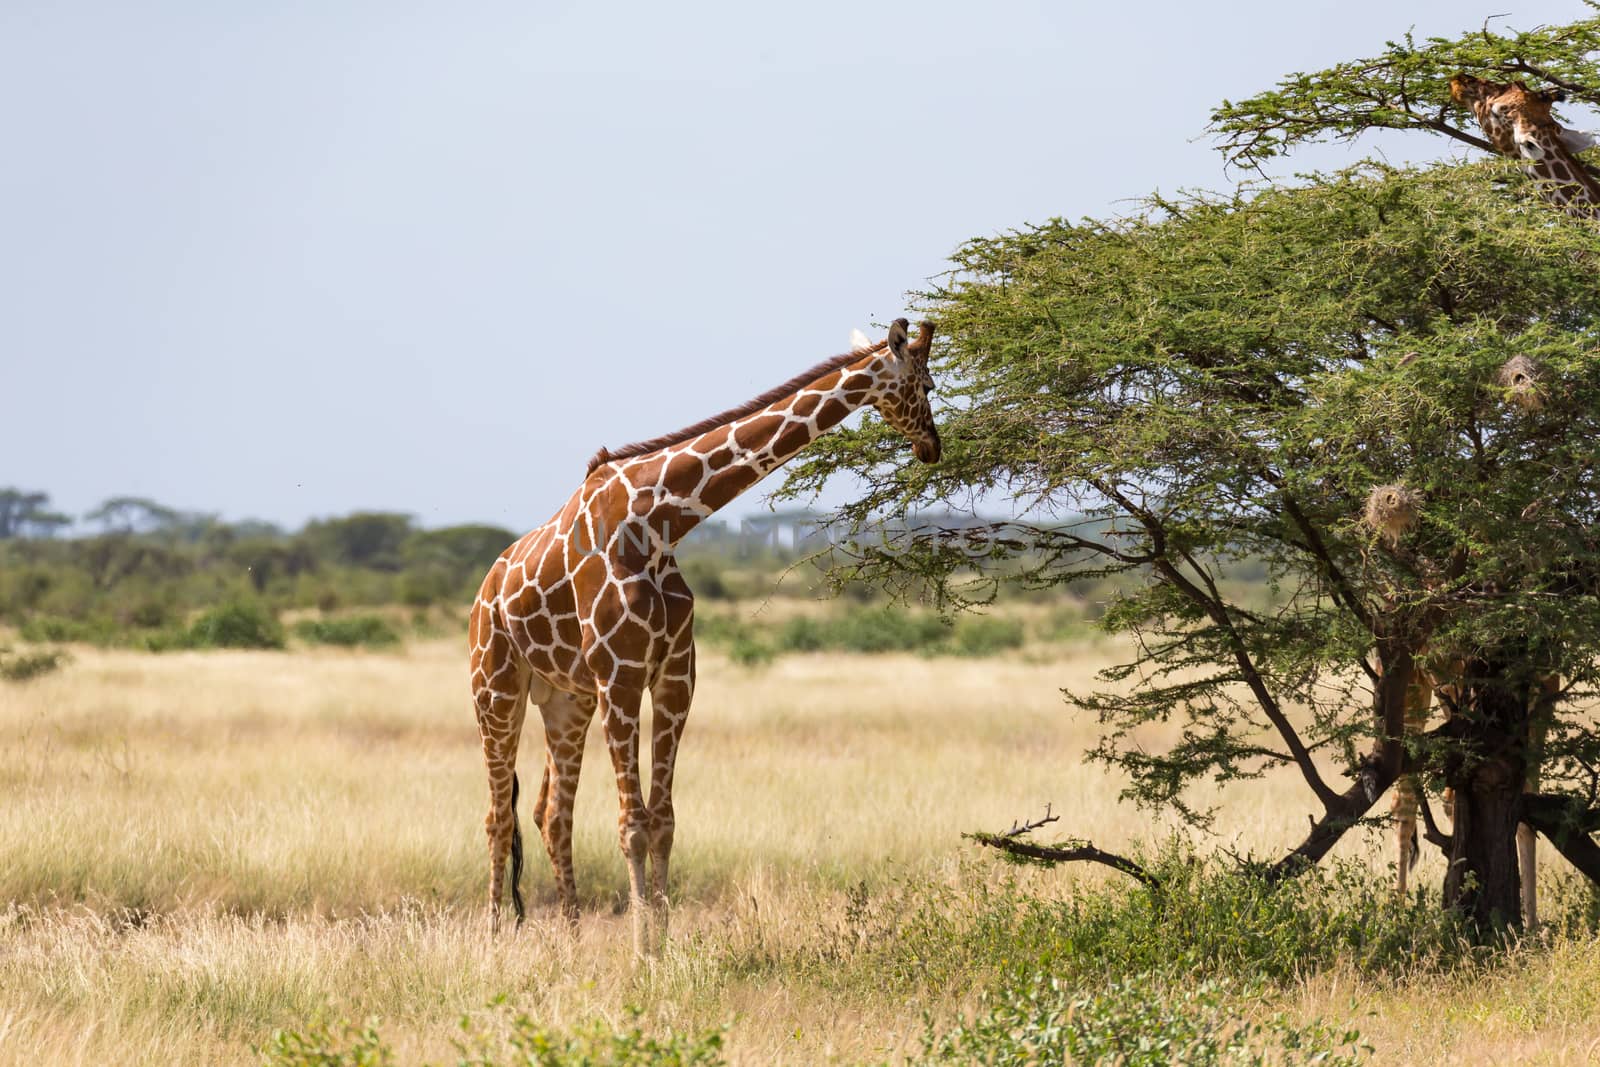 Giraffes in the savannah of Kenya with many trees and bushes in by 25ehaag6